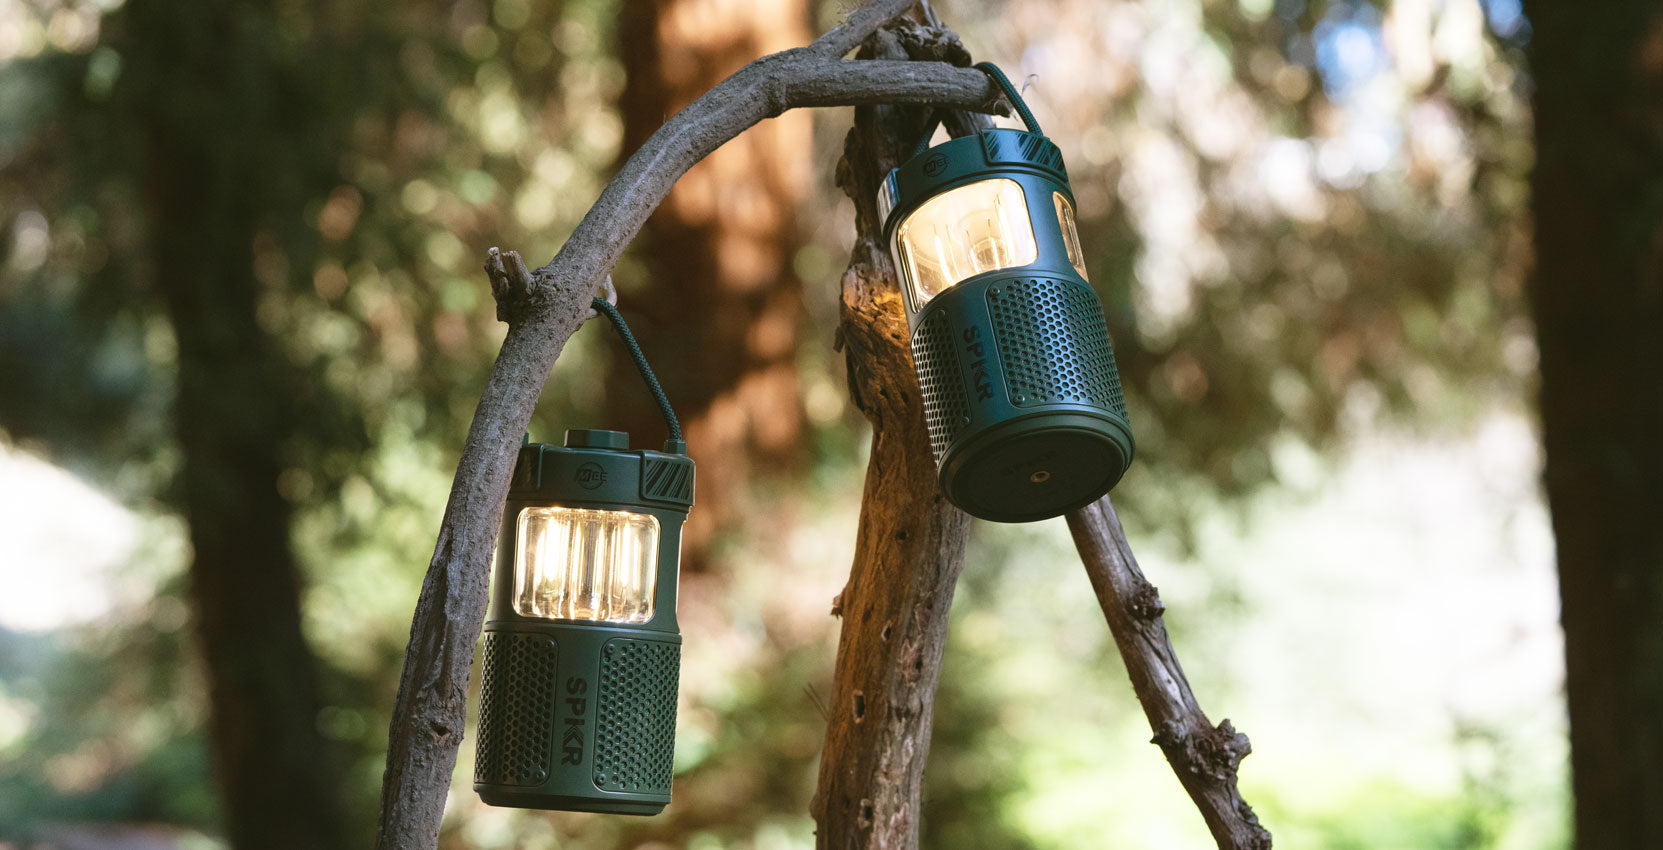 Two green camping lanterns hanging on a curved tree branch in a forest, illuminated from within and casting a warm light.